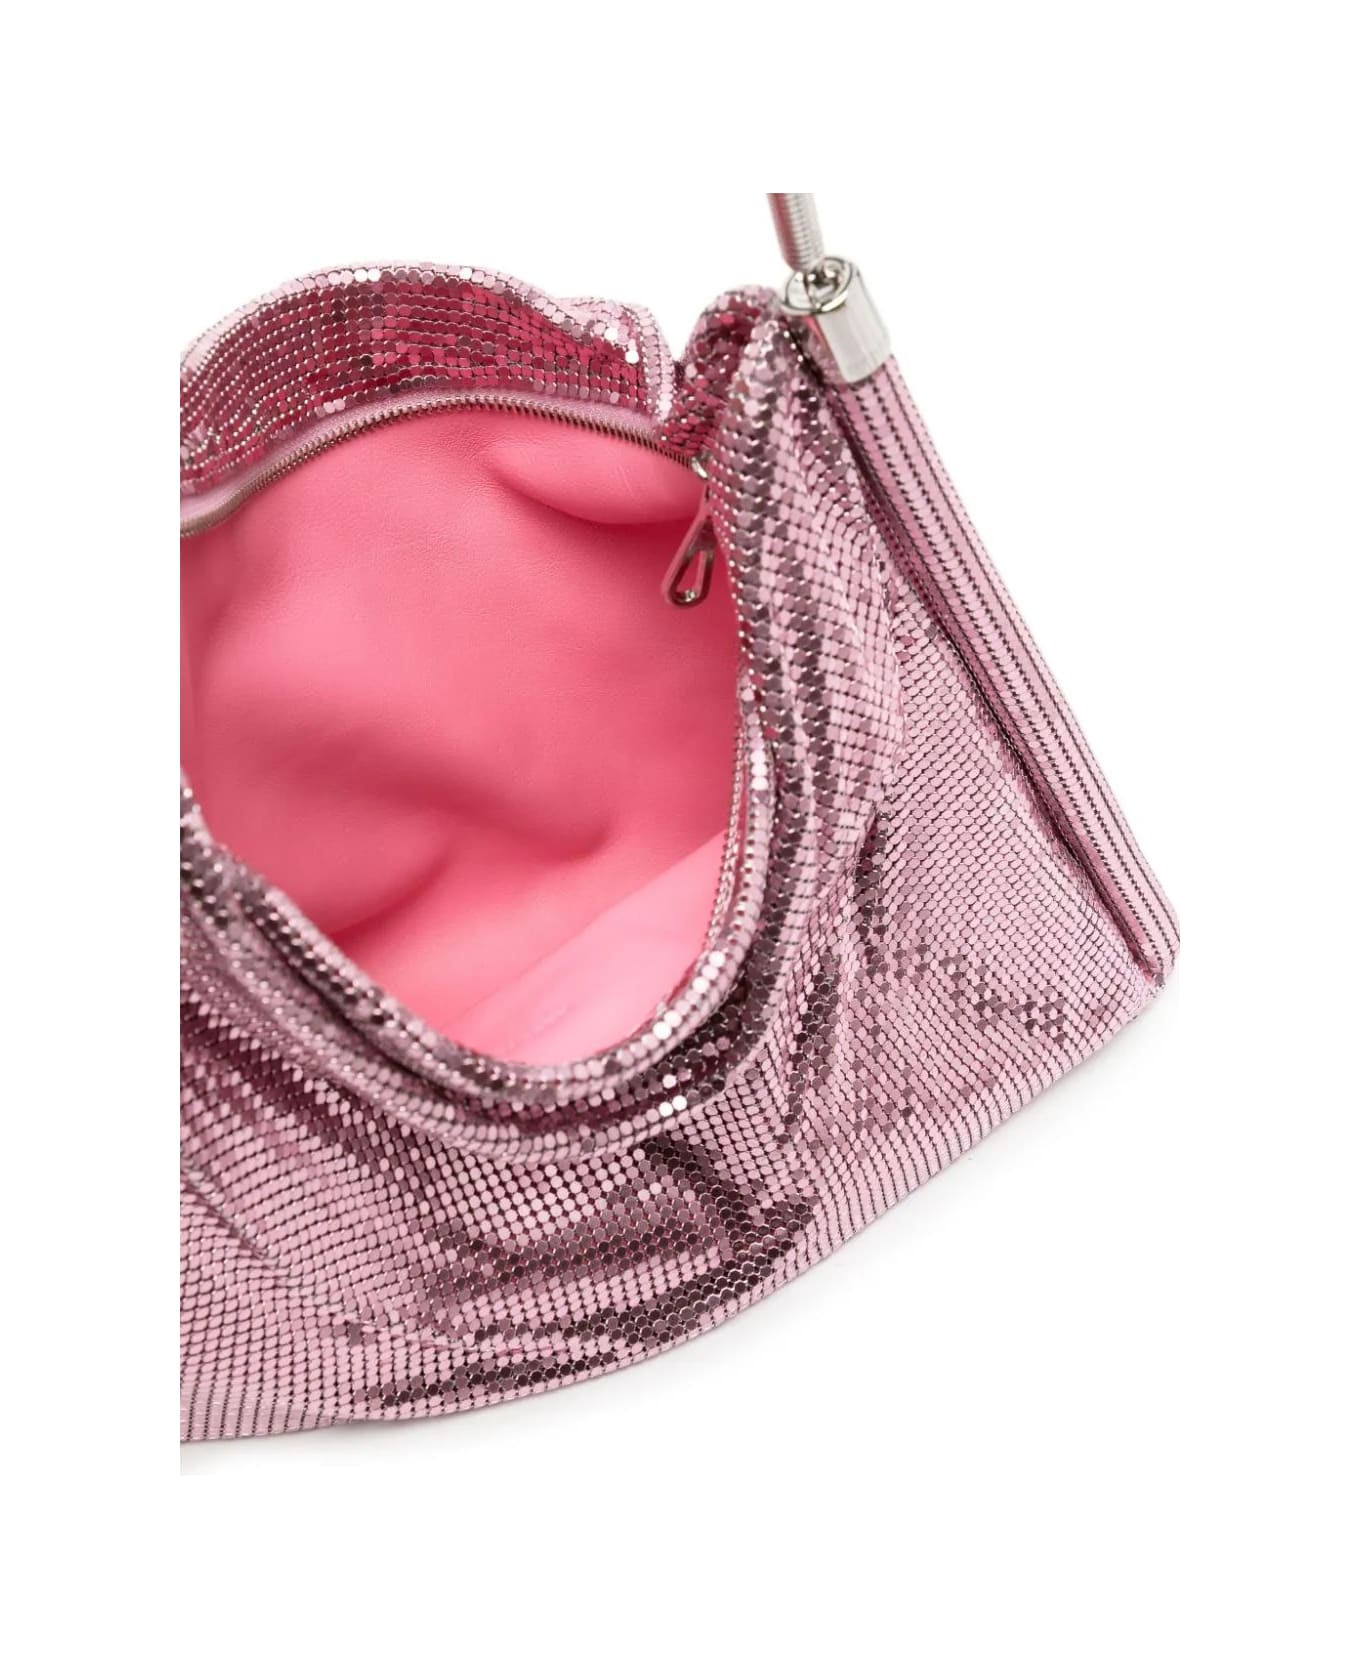 Paco Rabanne Pink Large Bag In Mesh Tube - Pink トートバッグ